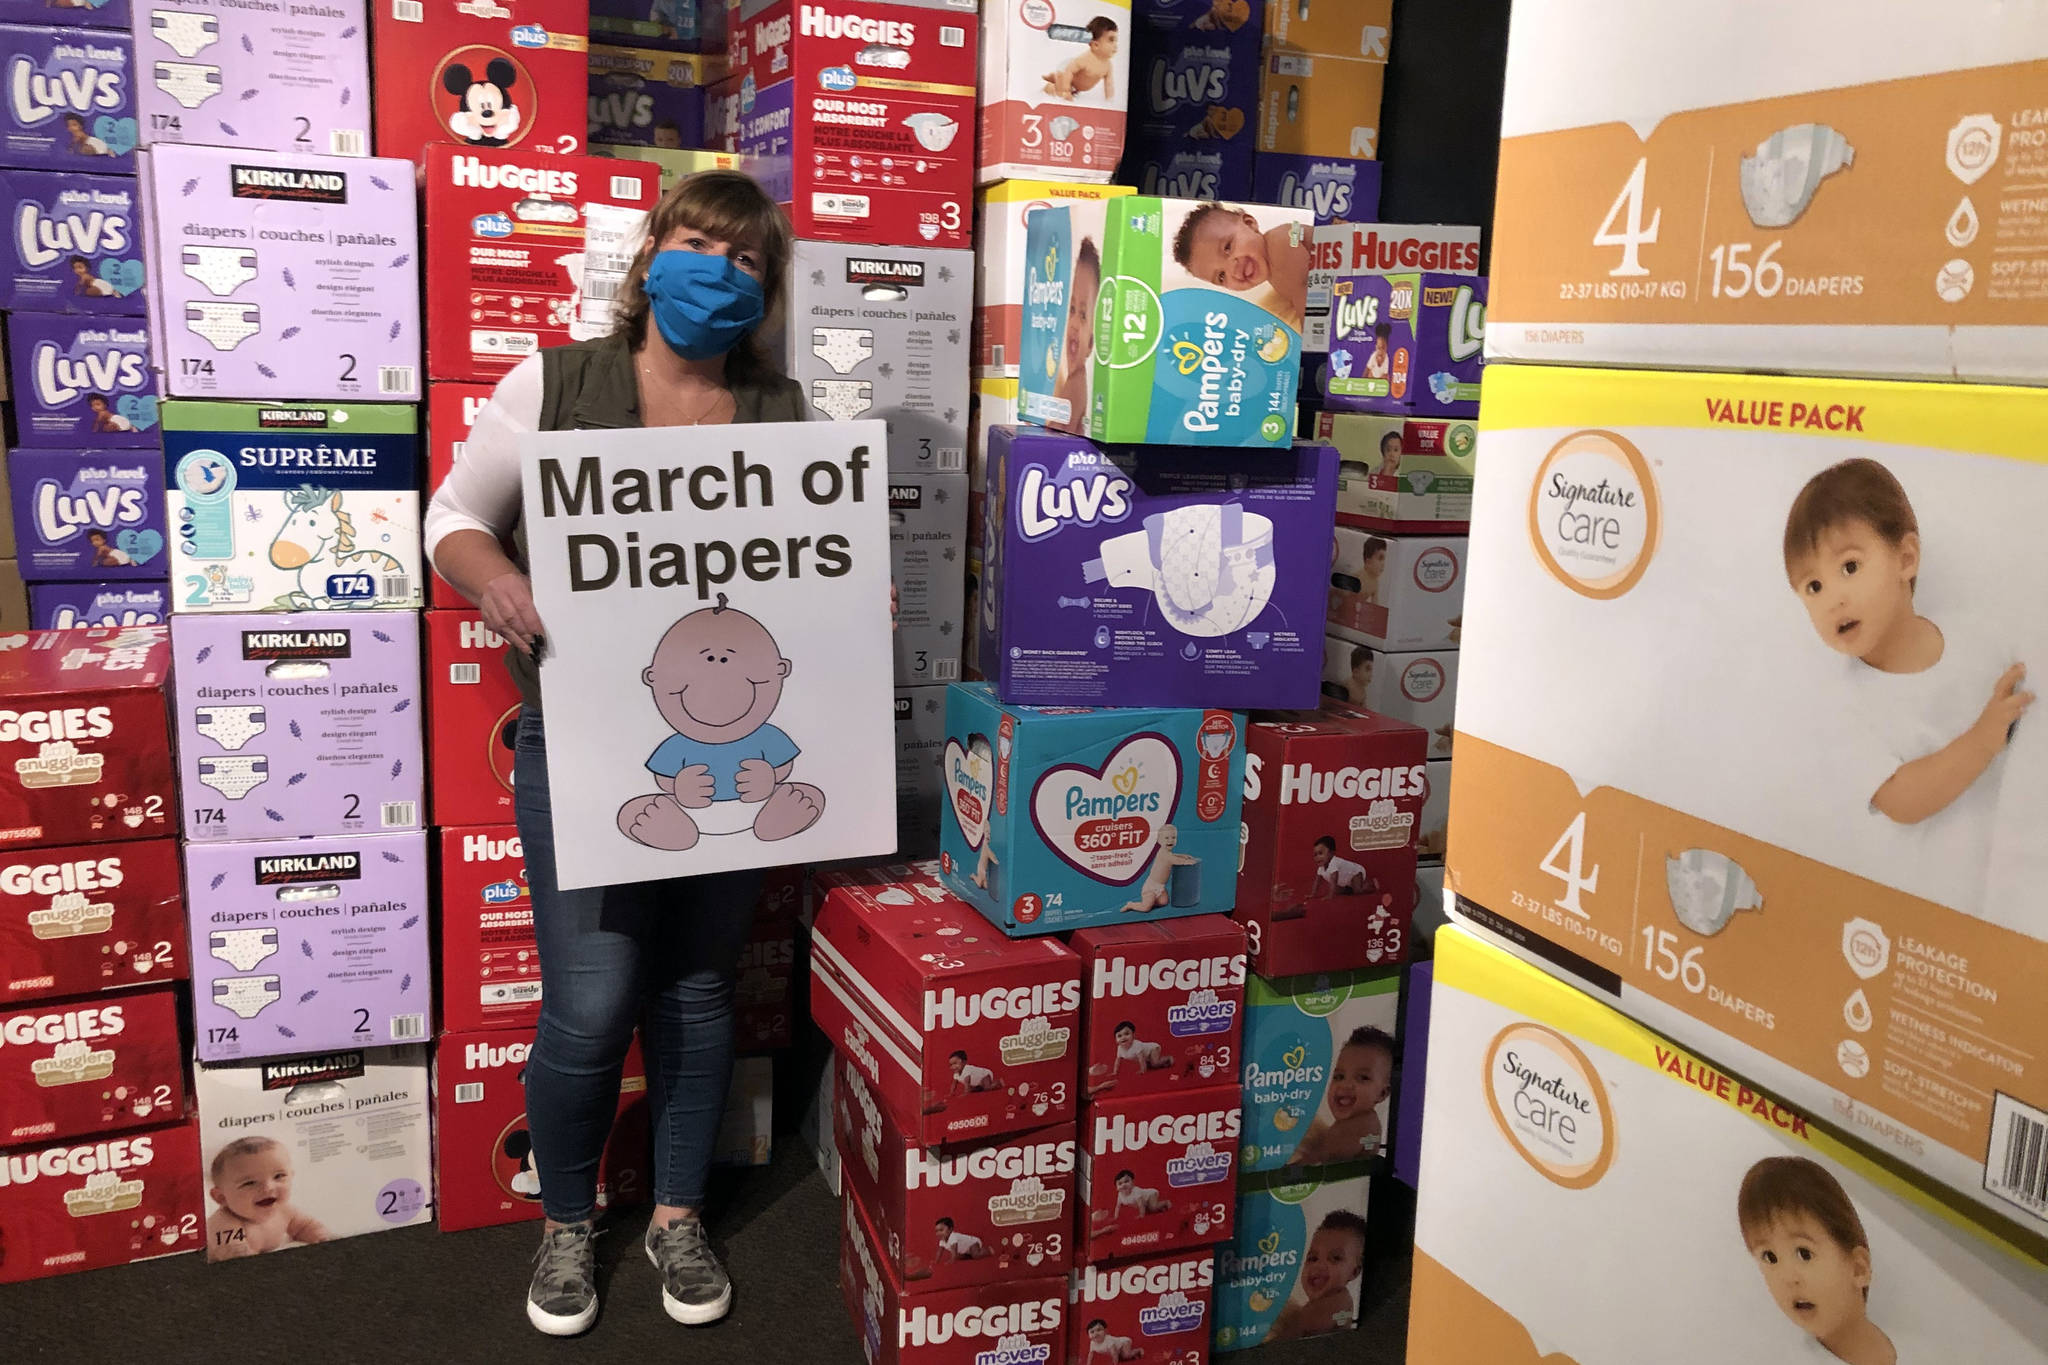 Cheryl Hurst stands among the thousands of diapers being stored at Billy McHale’s in Federal Way as part of the annual March of Diapers charity drive. (Photo by Andy Hobbs/Federal Way Mirror)